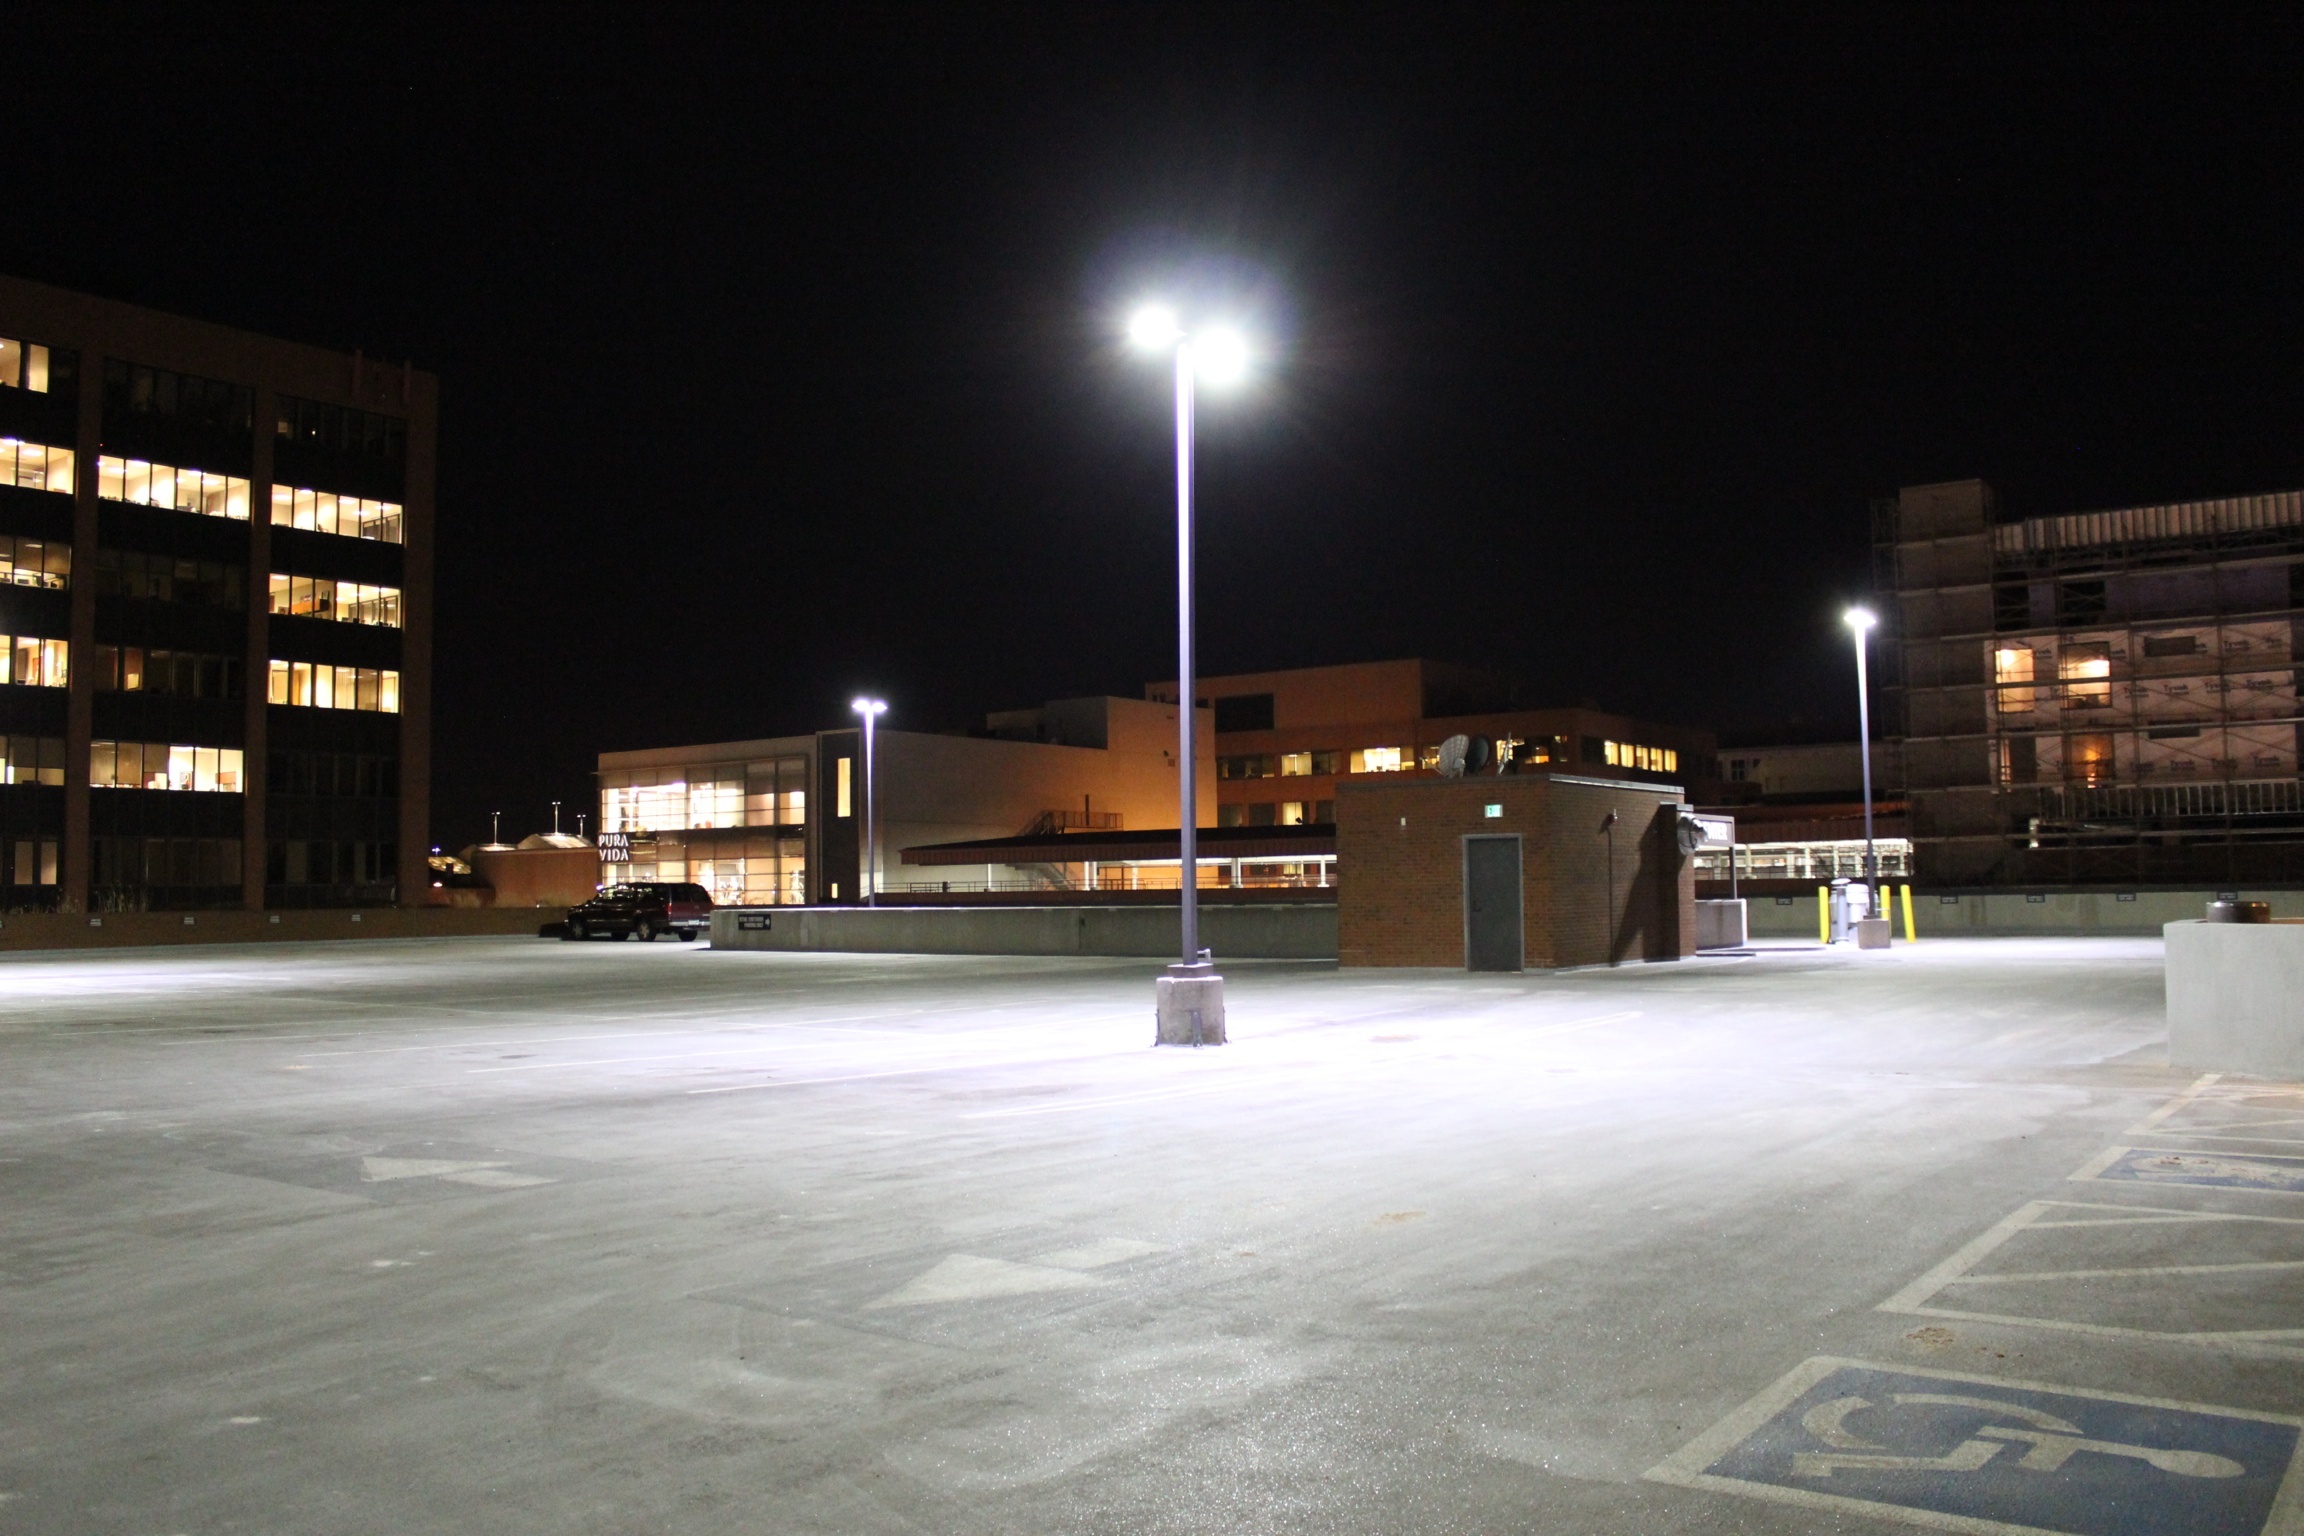 Parking Lot Lighting for Increased Security & Safety | Relumination